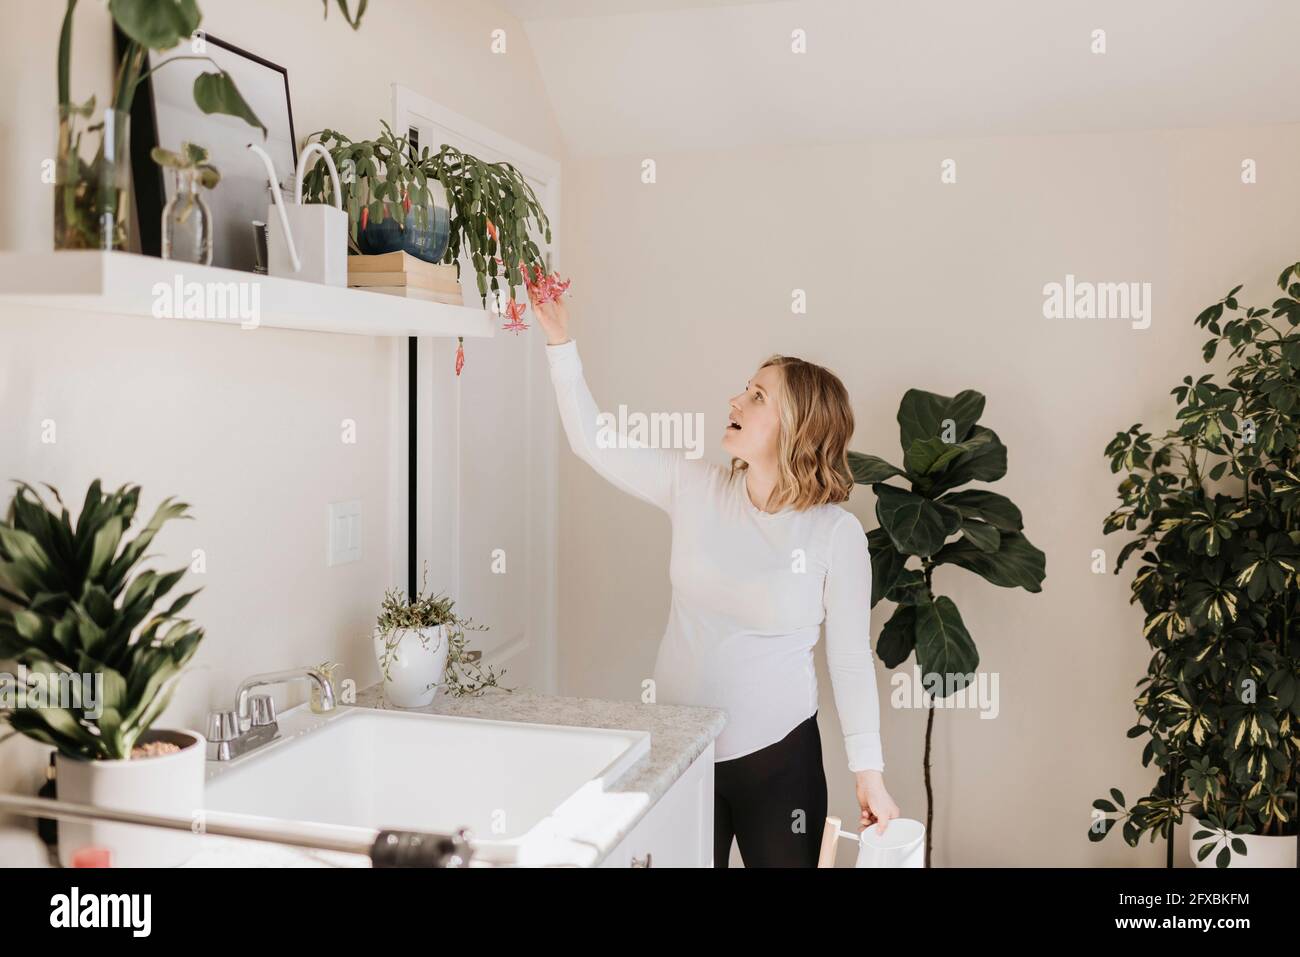 Careful woman touching potted plant on rack at home Stock Photo